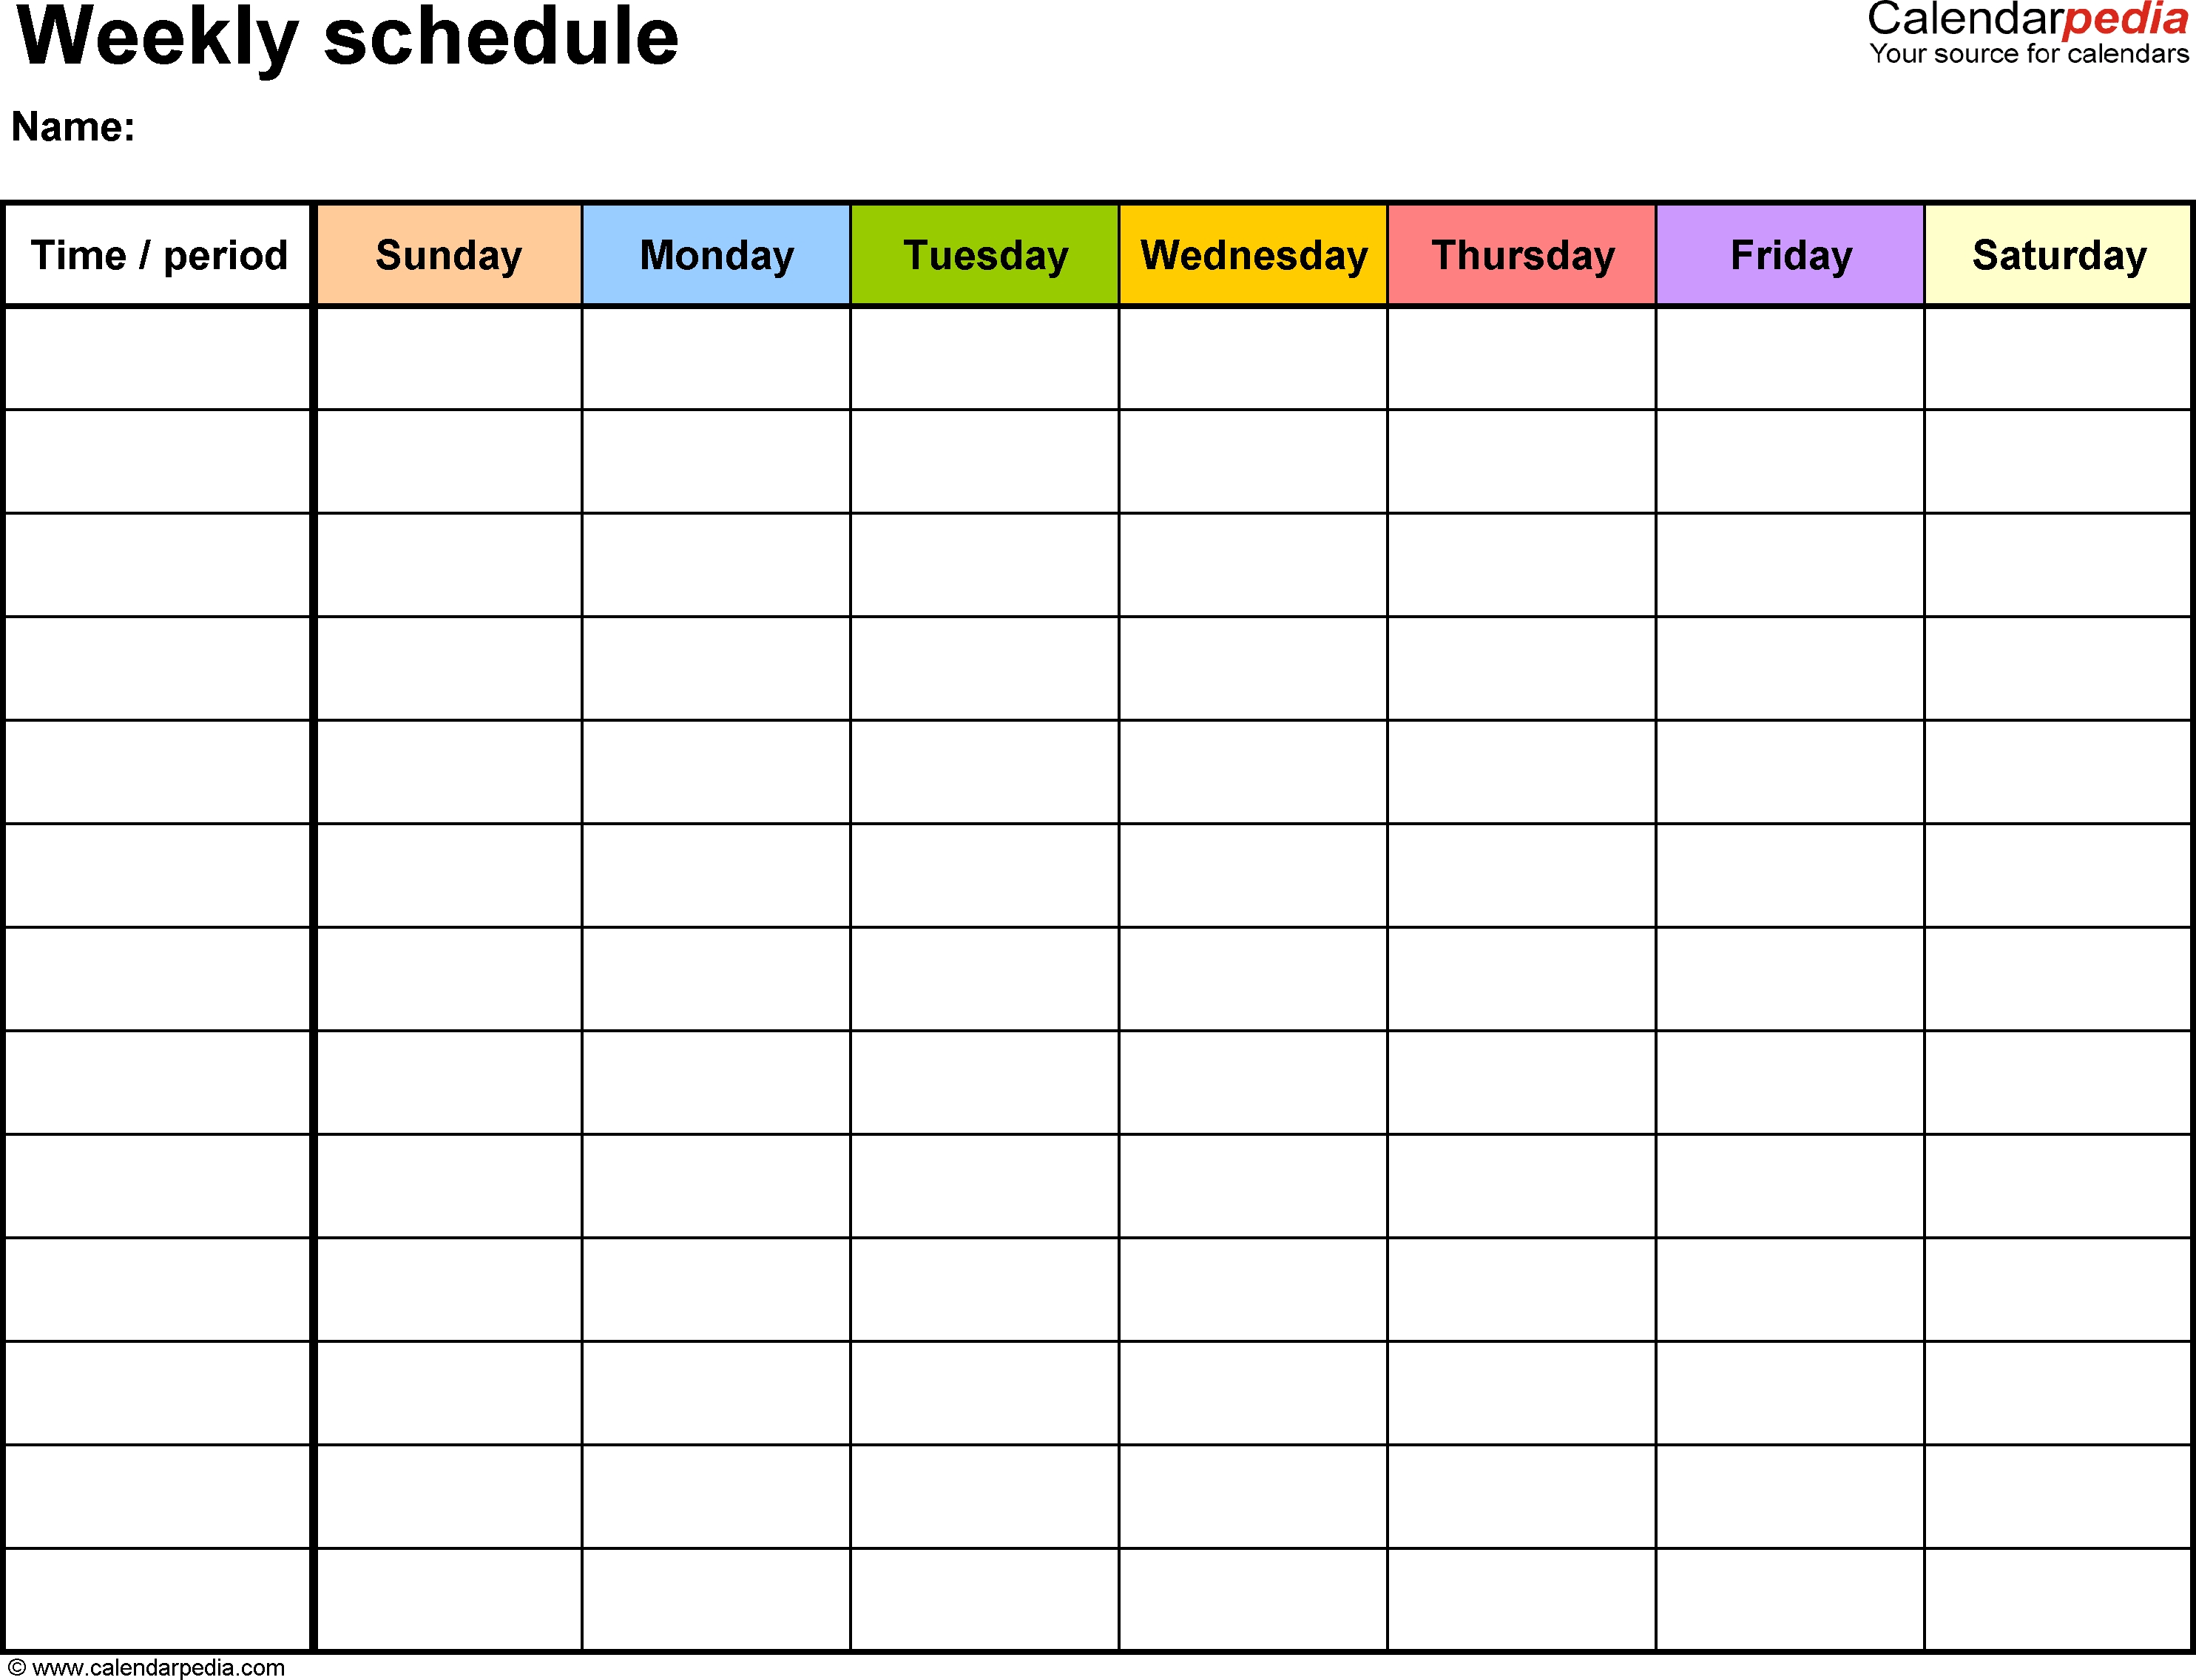 Free Weekly Schedule Templates For Excel - 18 Templates | ~Yoga for Editable Daily Calendar With Time Slots